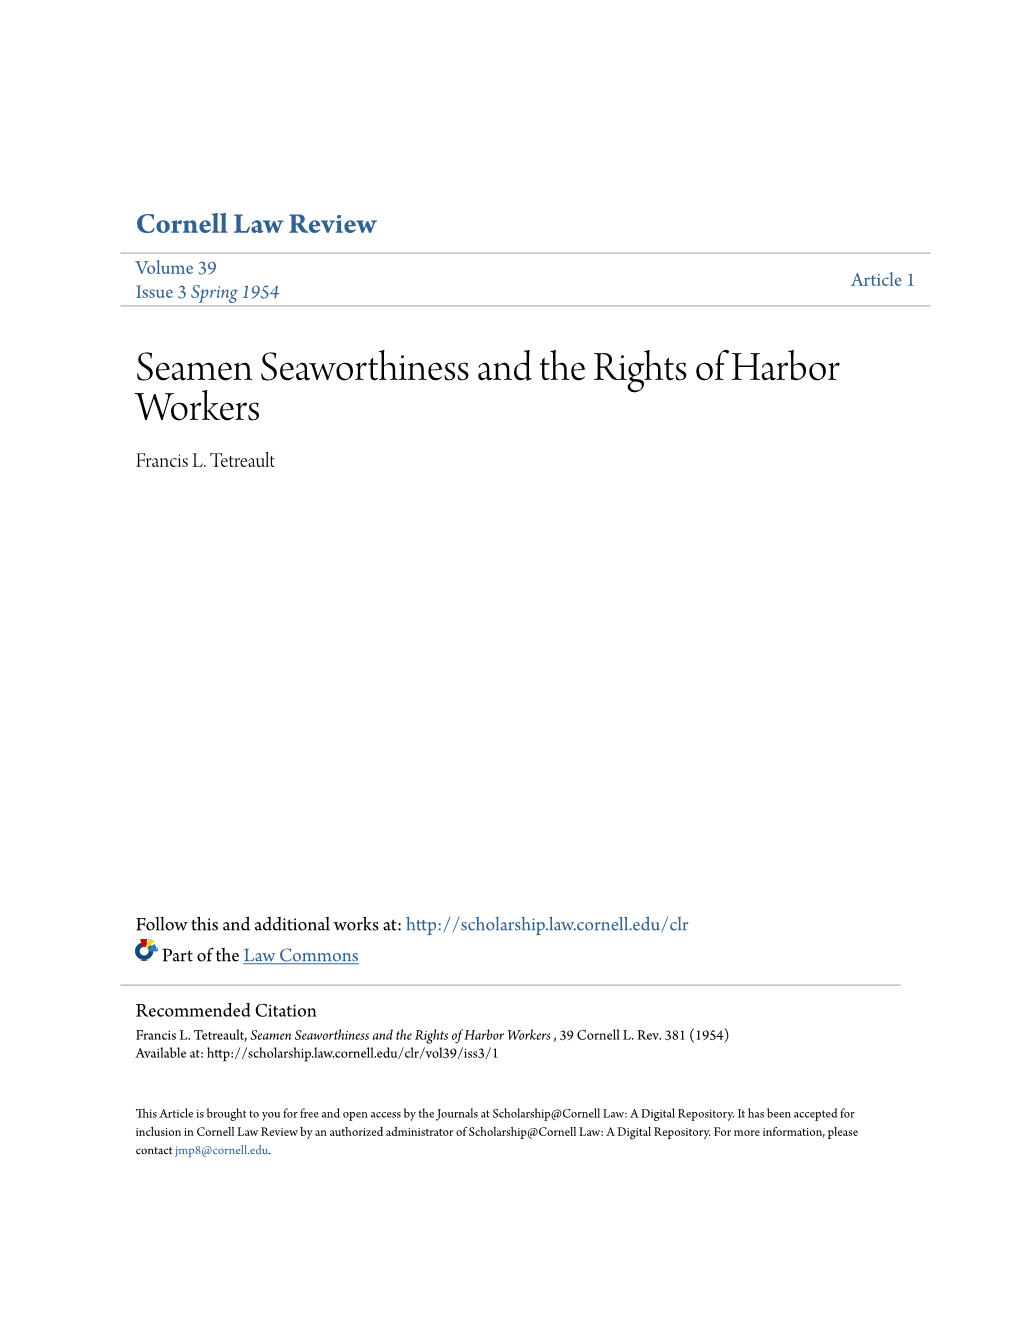 Seamen Seaworthiness and the Rights of Harbor Workers Francis L